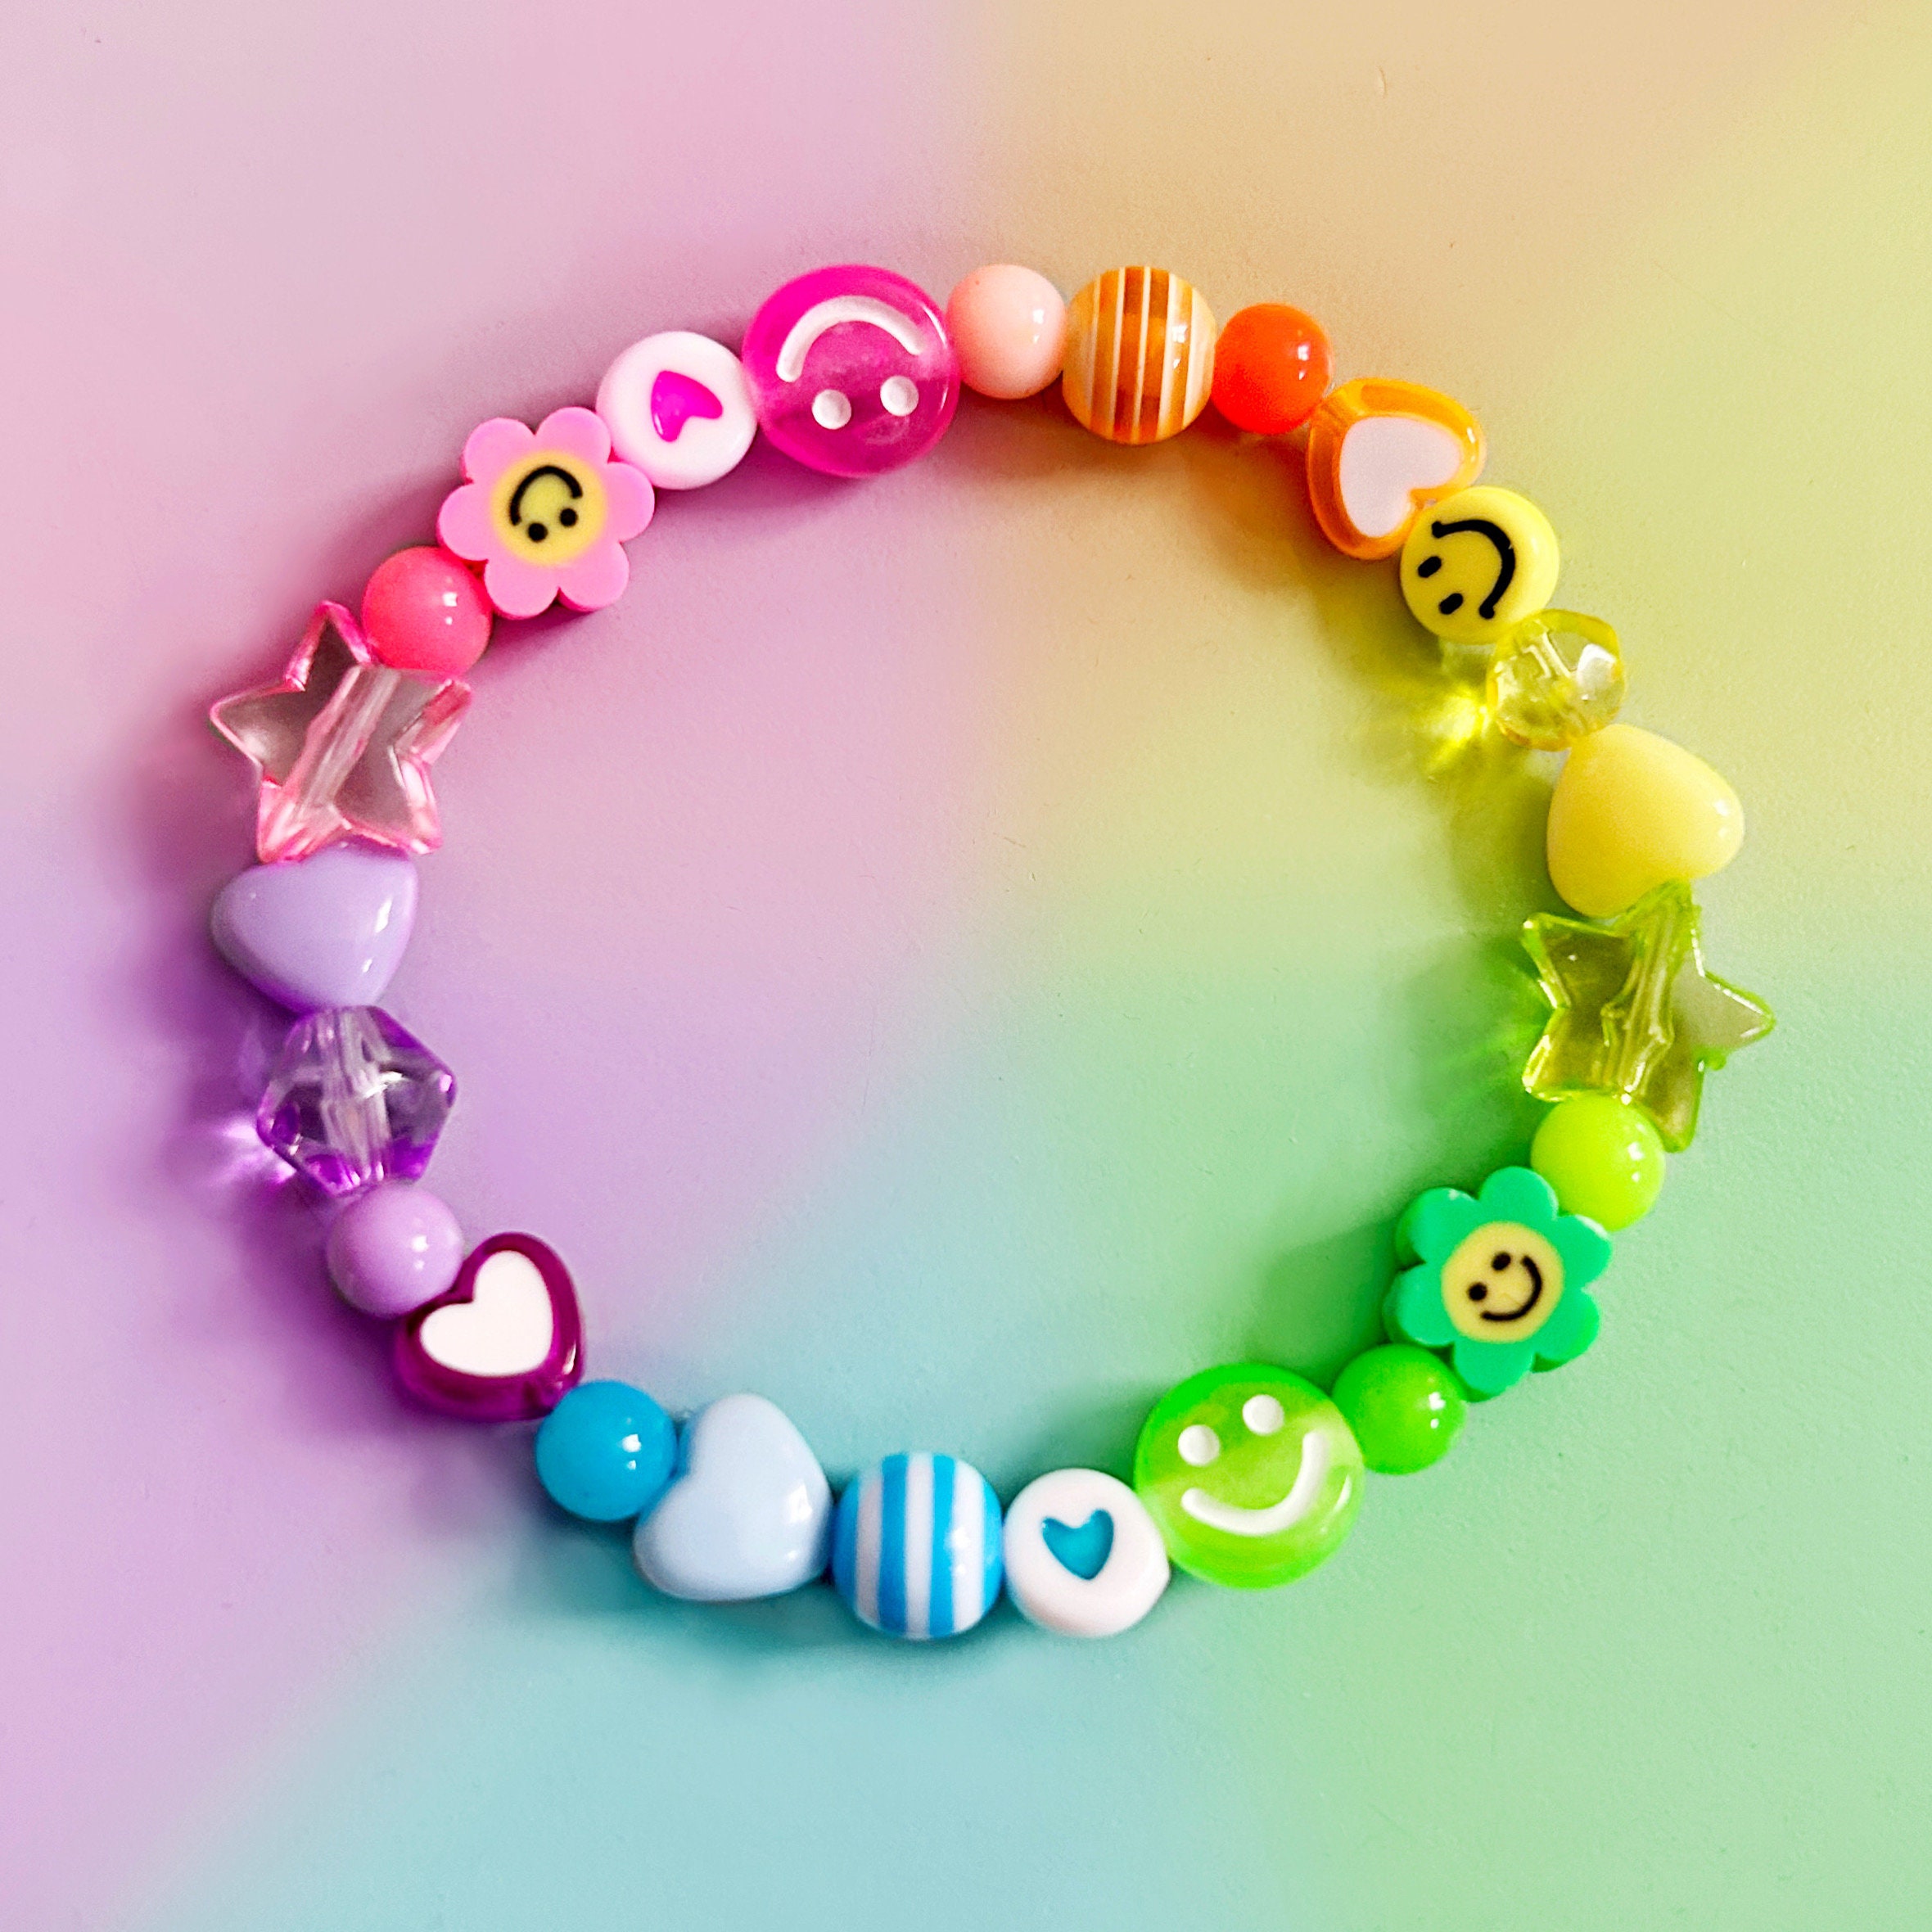 Mixed bead party bracelet. Handmade. Elasticated. Rainbow colours. Smileys,  flowers, hearts and stars. Super cute and colourful.